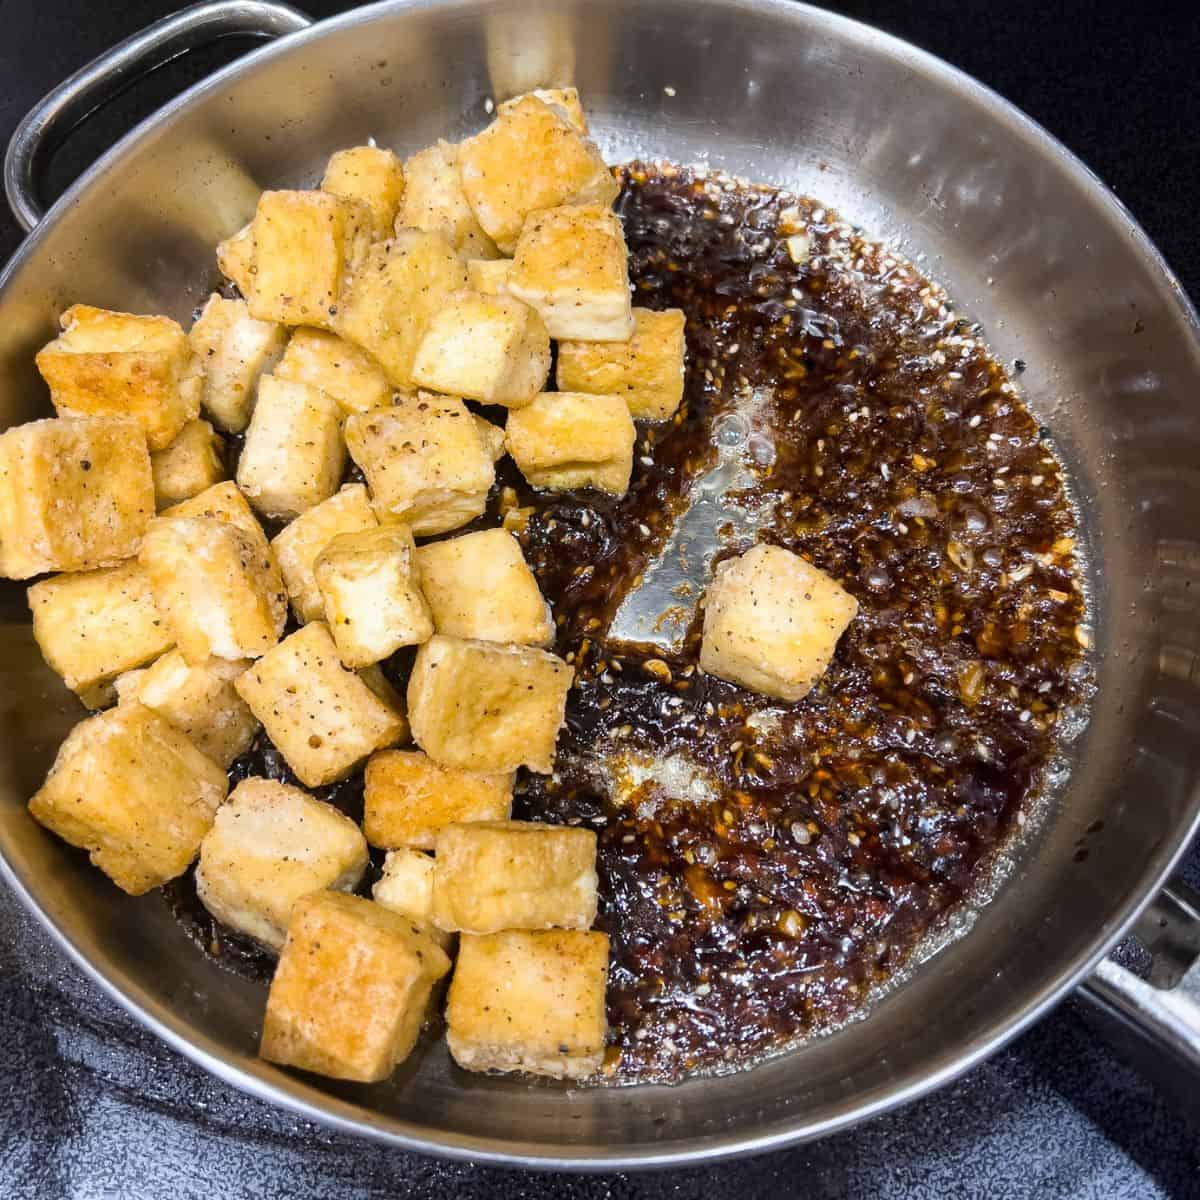 Adding to fried tofu to the skillet and coat it with the sweet and sticky sauce.